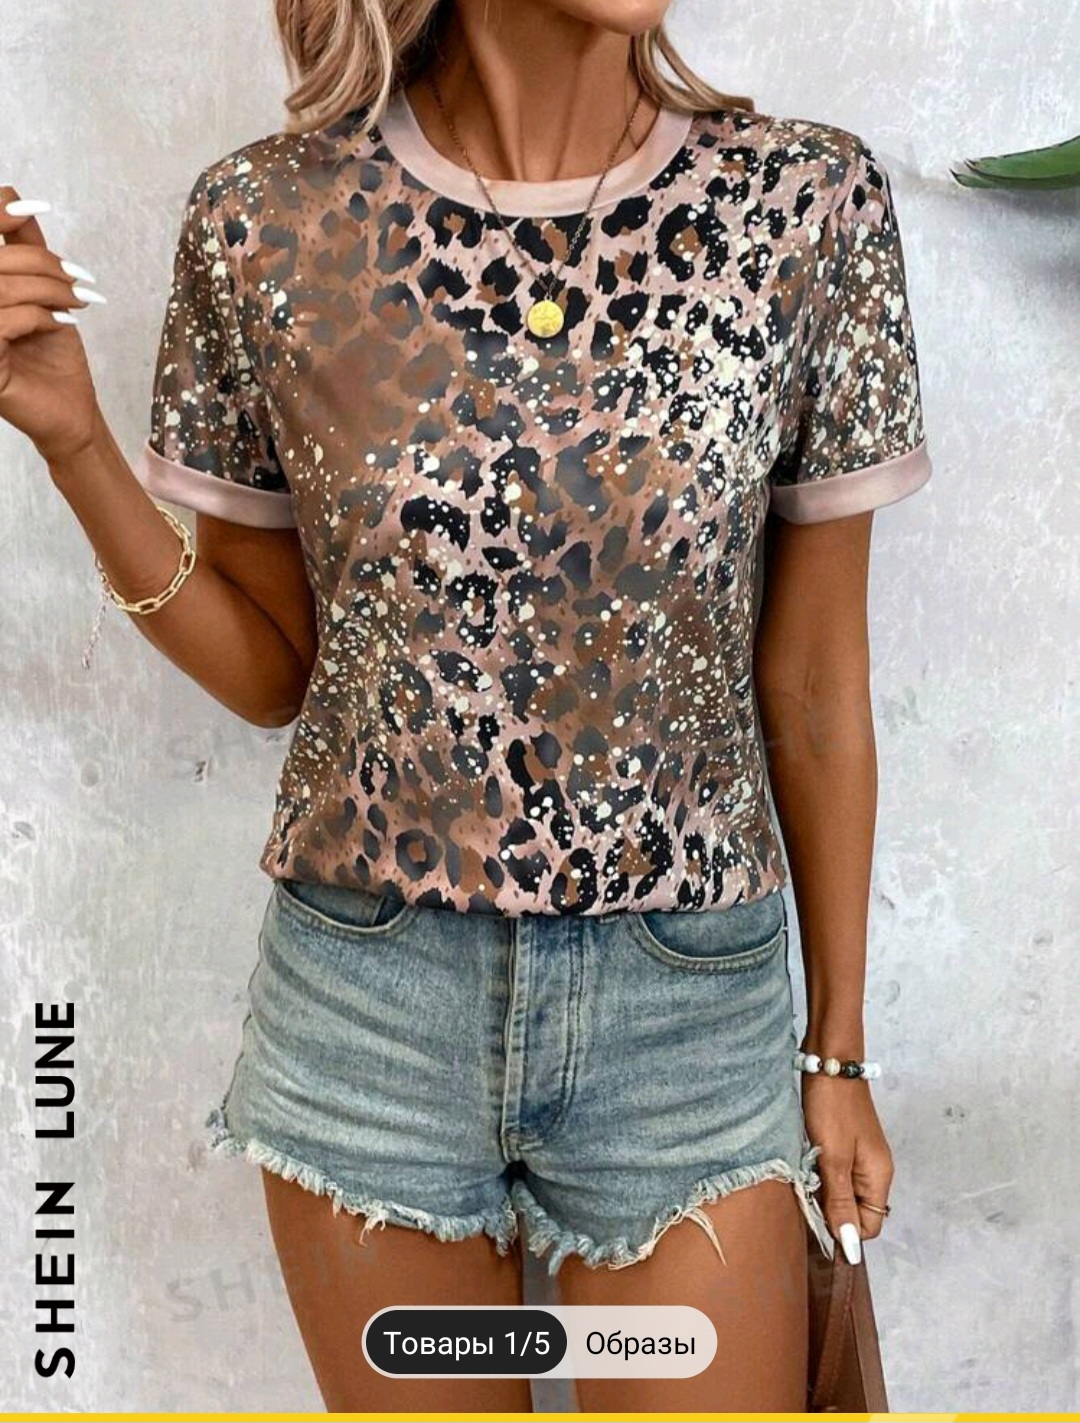 SHEIN LUNE Vintage-Style Leopard Print T-Shirt With Mottled Shimmer Print Effect